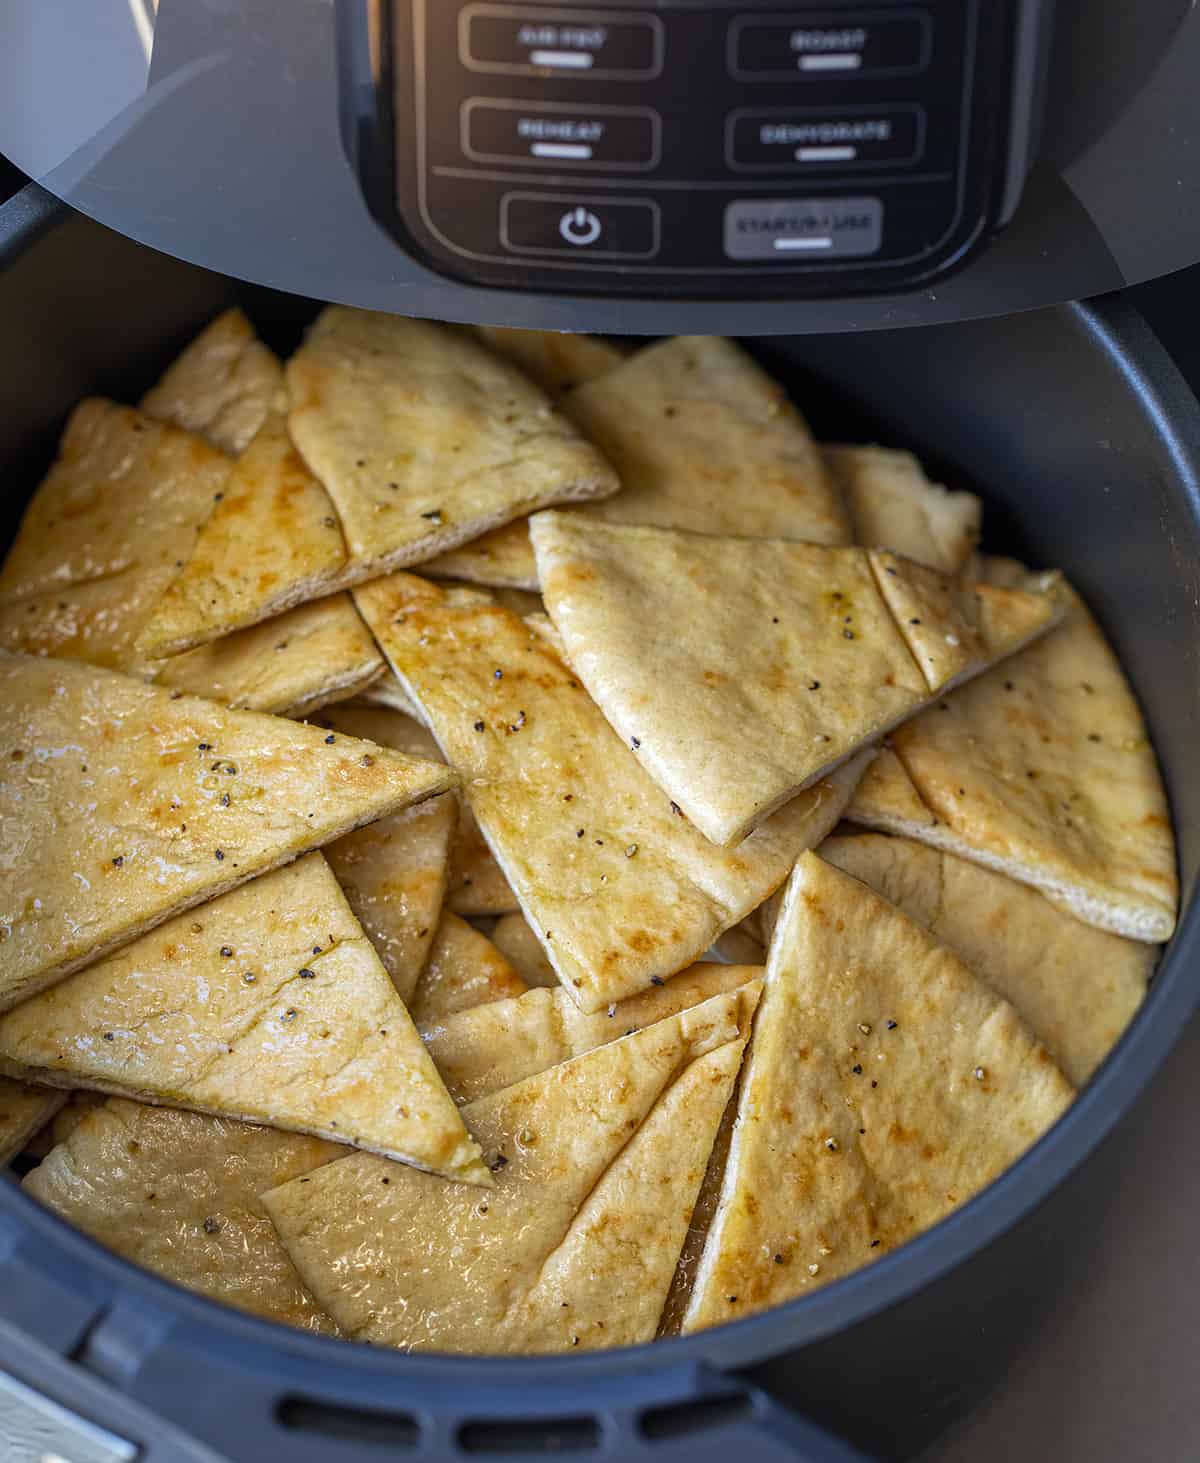 Pita Bread in the Air Fryer Before Cooking. Pita Chips, How to Make Pita Chips, Air Fryer Pita Chips, Pita Chips in the Oven, Seasoned Pita Chips, Crispy Pita Chips, recipes, Appetizers, i am homesteader, iamhomesteader